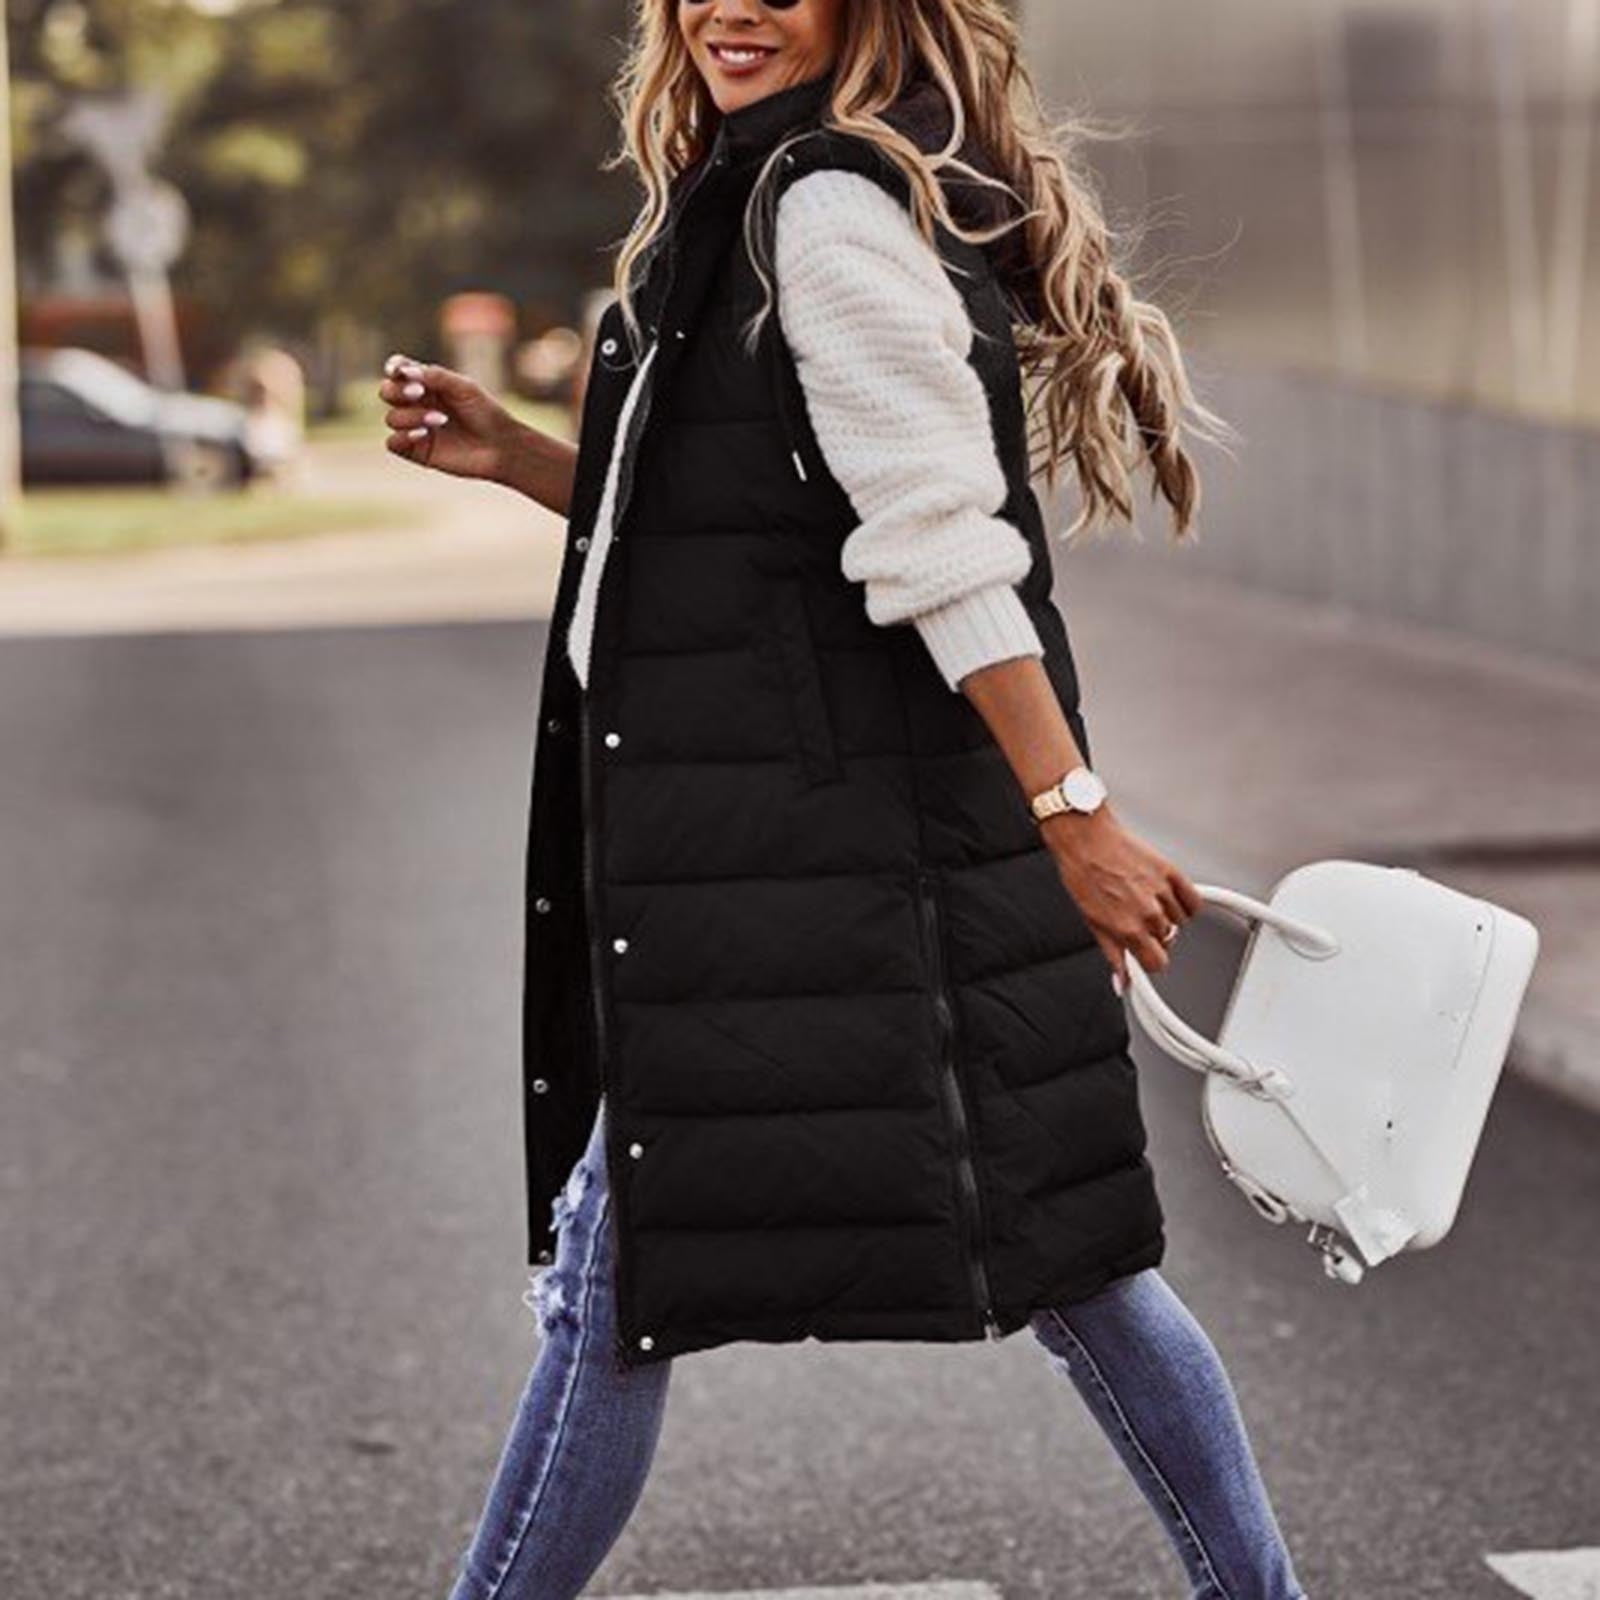 Womens Tops Women'S Long Winter Coat Vest With Hood Sleeveless Warm Down Coat With Pockets Quilted Vest Jacket Quilted Outdoor Jacket Black Dresses For Walmart.com